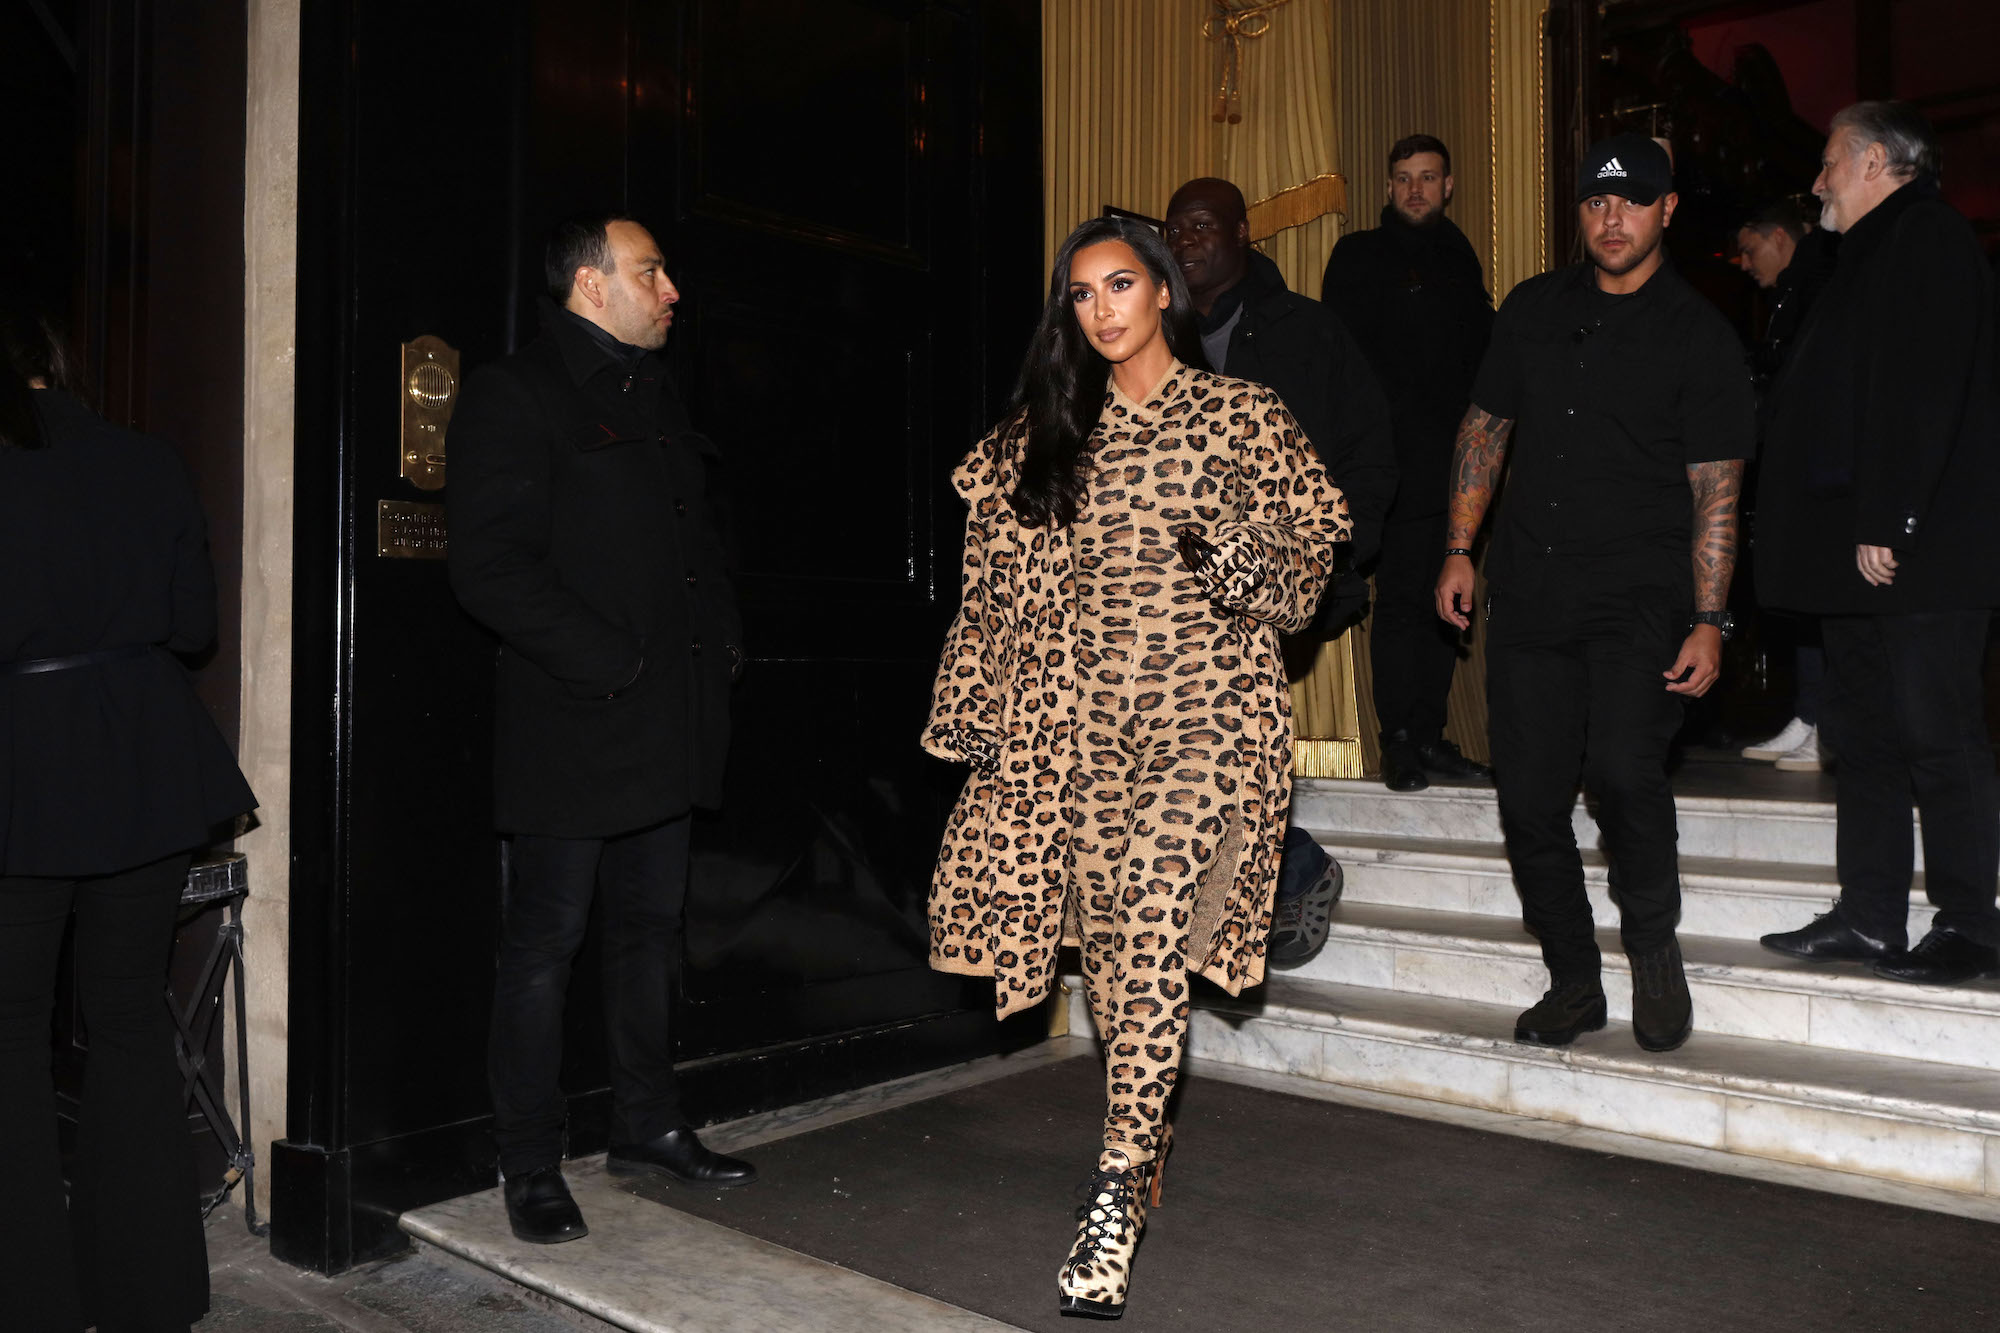 Kim Kardashian West walking out of a building surrounded by security